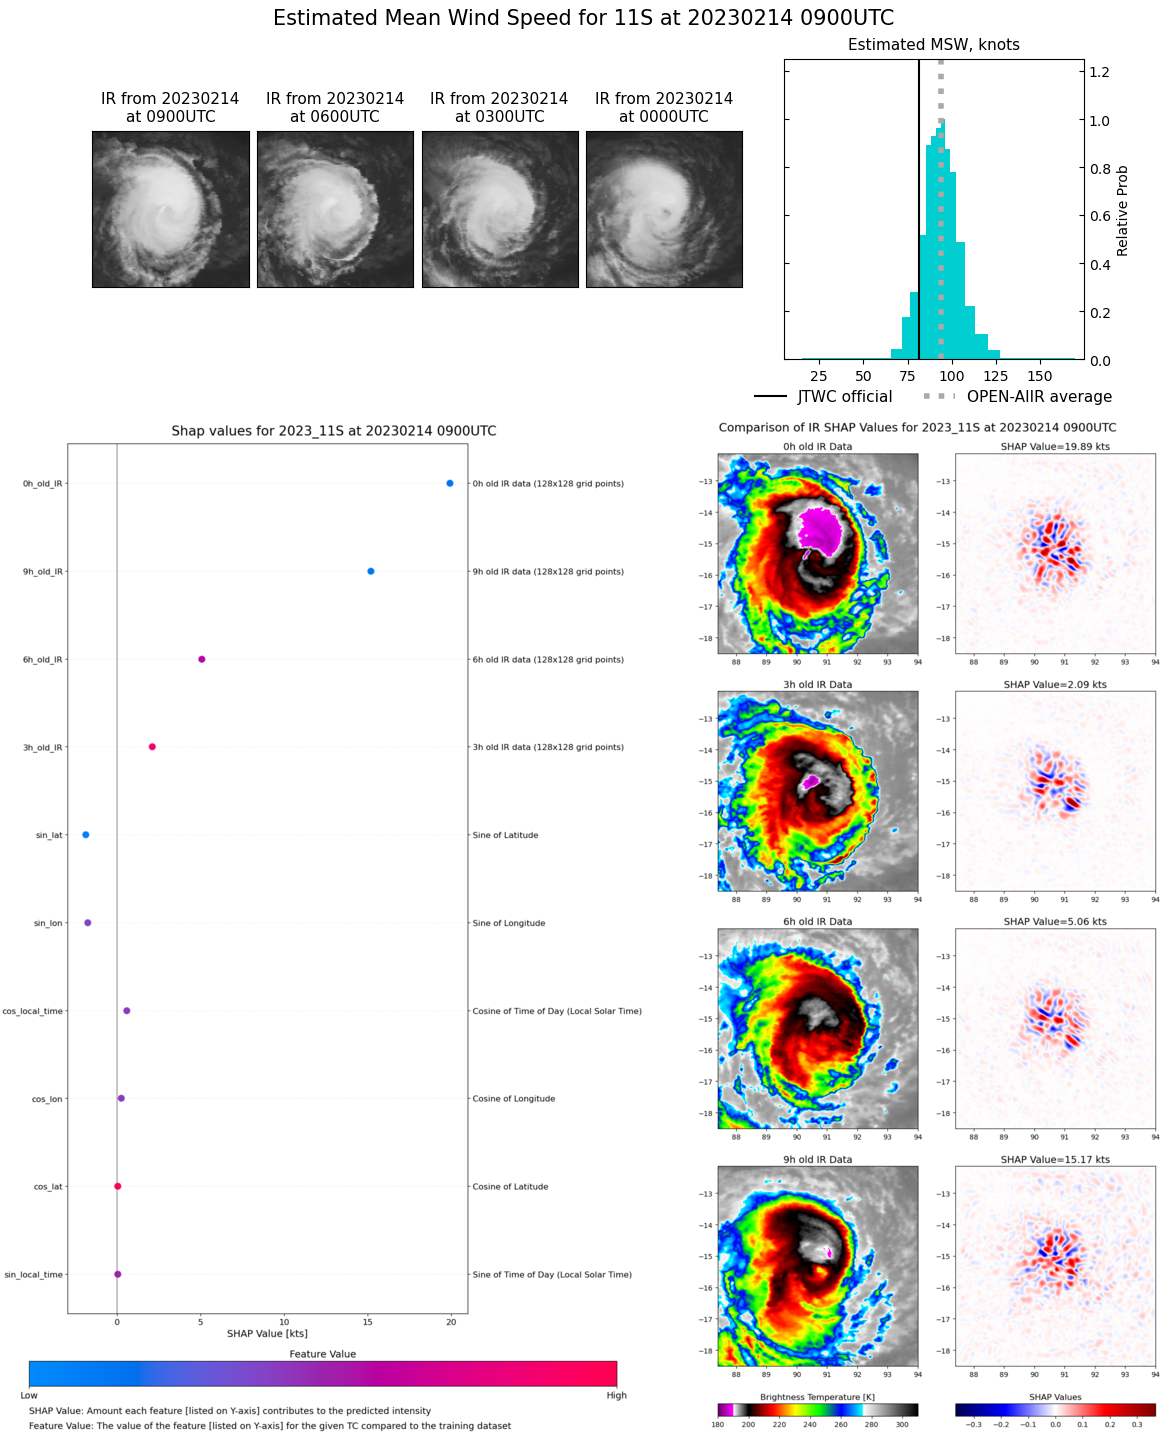 SATELLITE ANALYSIS, INITIAL POSITION AND INTENSITY DISCUSSION: ANIMATED MULTISPECTRAL SATELLITE IMAGERY (MSI) DEPICTS DEEP CONVECTION WRAPPING INTO A RAGGED, CLOUD-FILLED EYE. DEEP CONVECTION IN ENHANCED INFRARED SATELLITE IMAGERY IS CONCENTRATED IN THE DOWN-SHEAR RIGHT QUADRANT, WHICH IS INDICATIVE OF THE CONTINUED PRESENCE OF EASTERLY VERTICAL WIND SHEAR. A 132310Z SSMIS 91GHZ MICROWAVE IMAGE REVEALS A 20 NM MICROWAVE EYE, LENDING HIGH CONFIDENCE IN THE INITIAL POSITION. THE INITIAL INTENSITY OF 85 KTS IS ASSESSED WITH HIGH CONFIDENCE BASED ON A BLEND OF CIMSS SATCON, ADT, ATMS, SSMIS, AND INTERAGENCY DVORAK ESTIMATES.  A 131548Z METOP-C ASCAT IMAGE WAS USED TO ADJUST THE INITIAL WIND RADII.